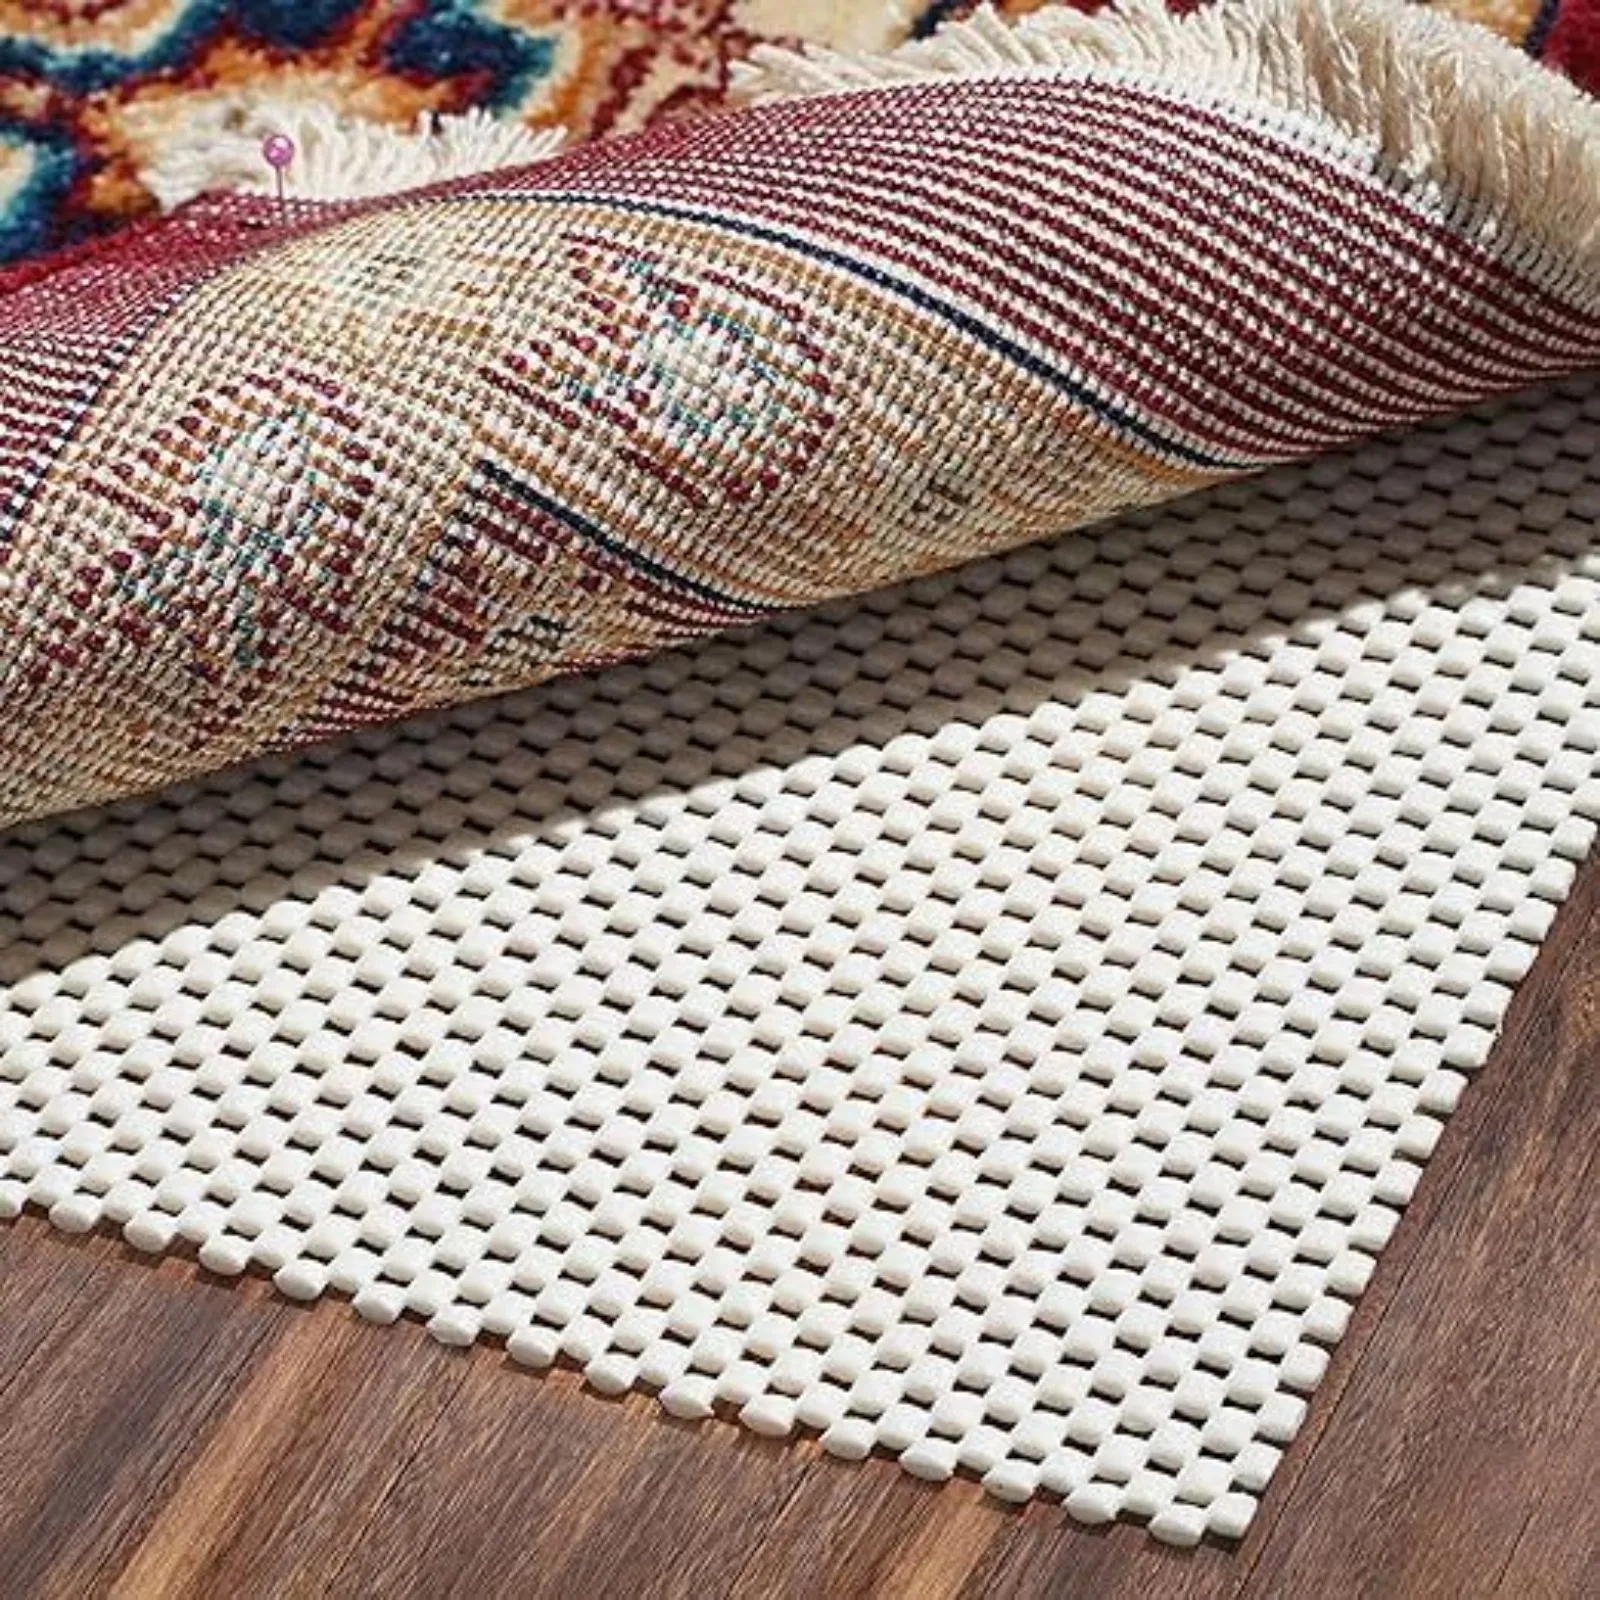 

6.5×9.5 FT Rug Pad Non-Slip Extra Thick Gripper Any Hard Surface Floor cuttable